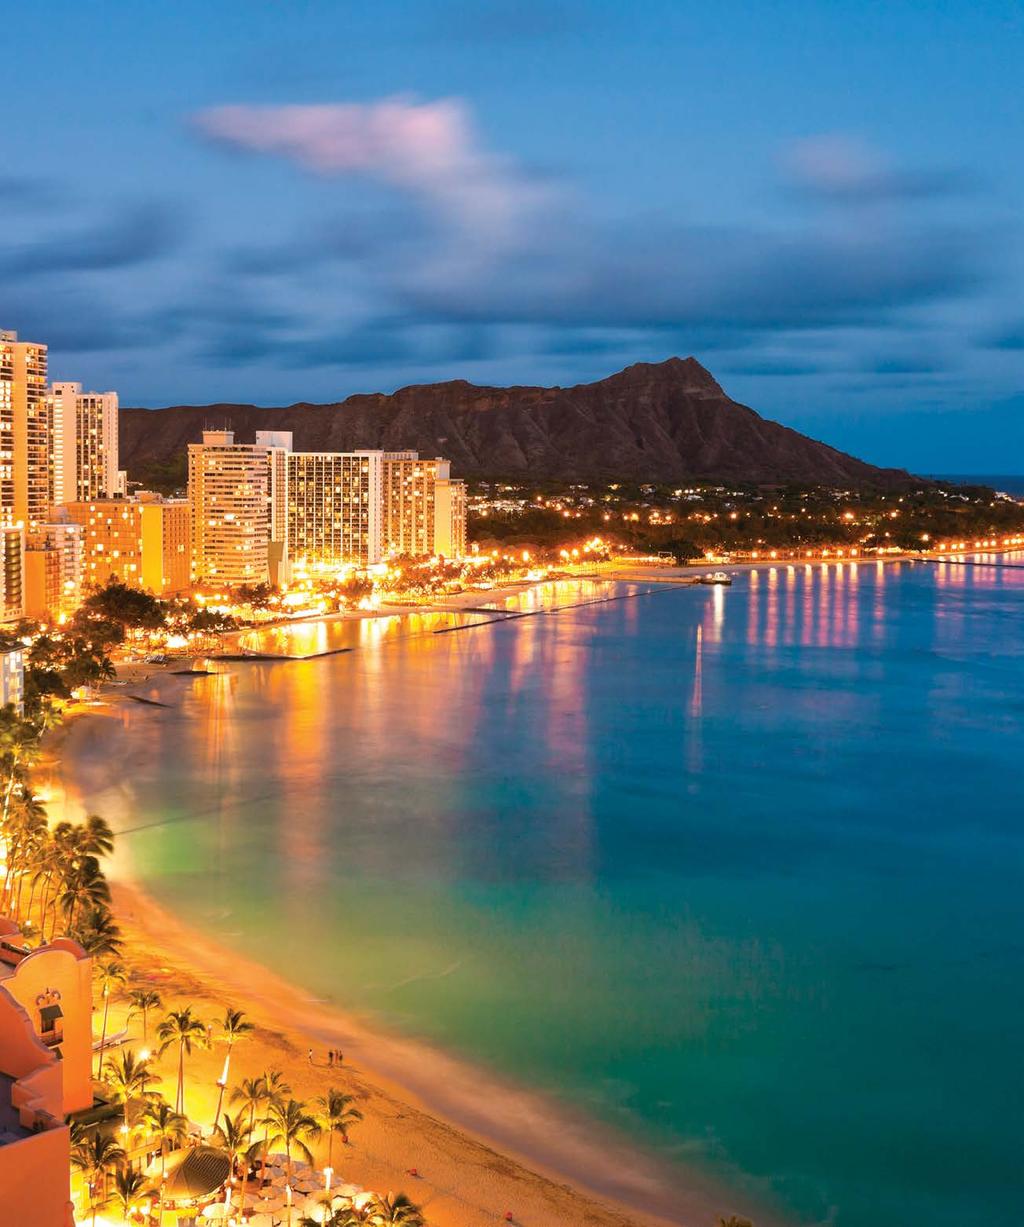 Six amazing islands, endless incredible experiences With Hawaiian Airlines, Hawai i starts the moment you step aboard our non-stop flight from Sydney or Brisbane to Honolulu, or transfer to your